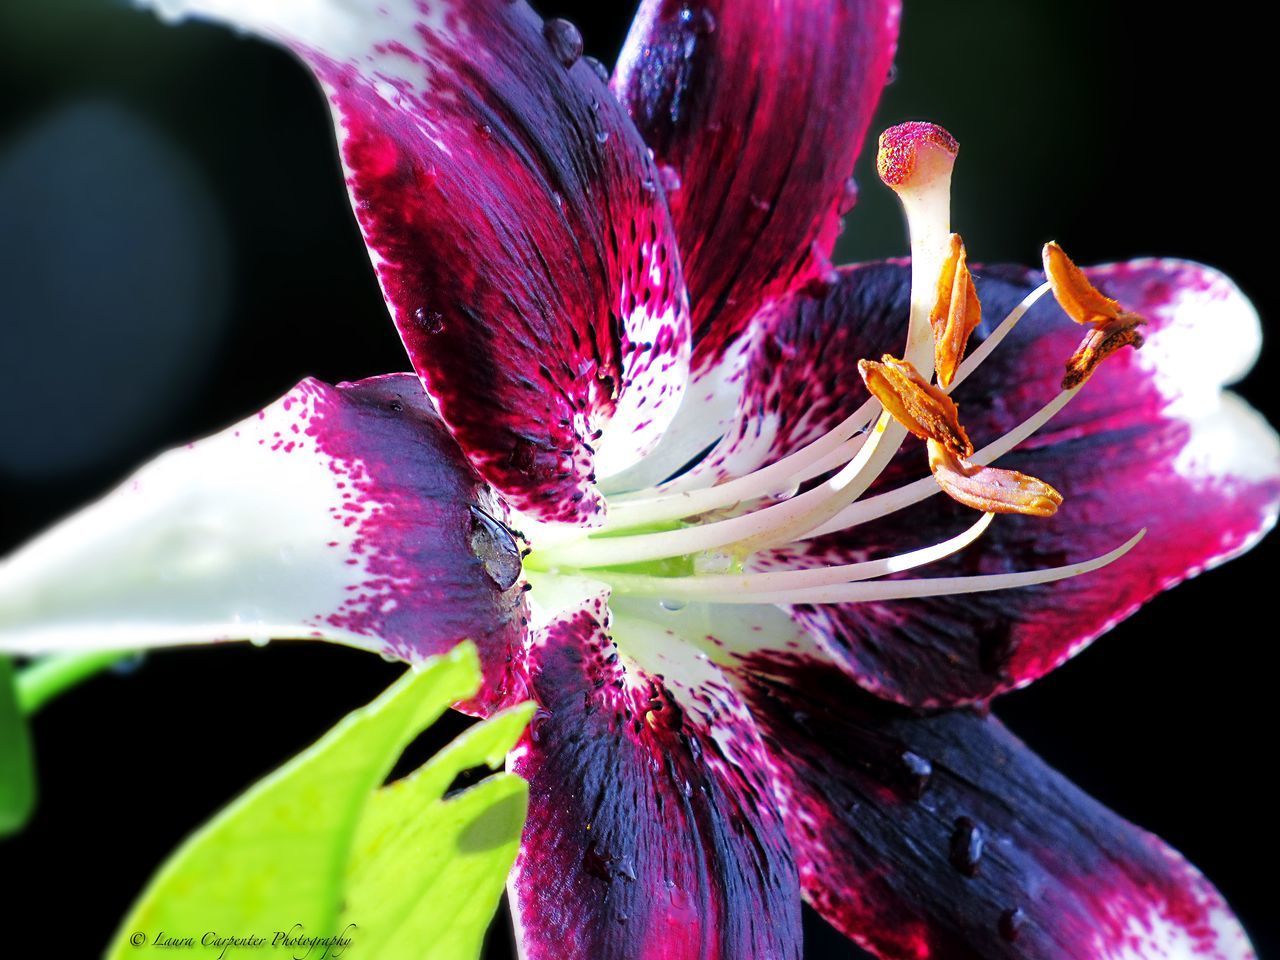 CLOSE-UP OF PURPLE LILY PLANT